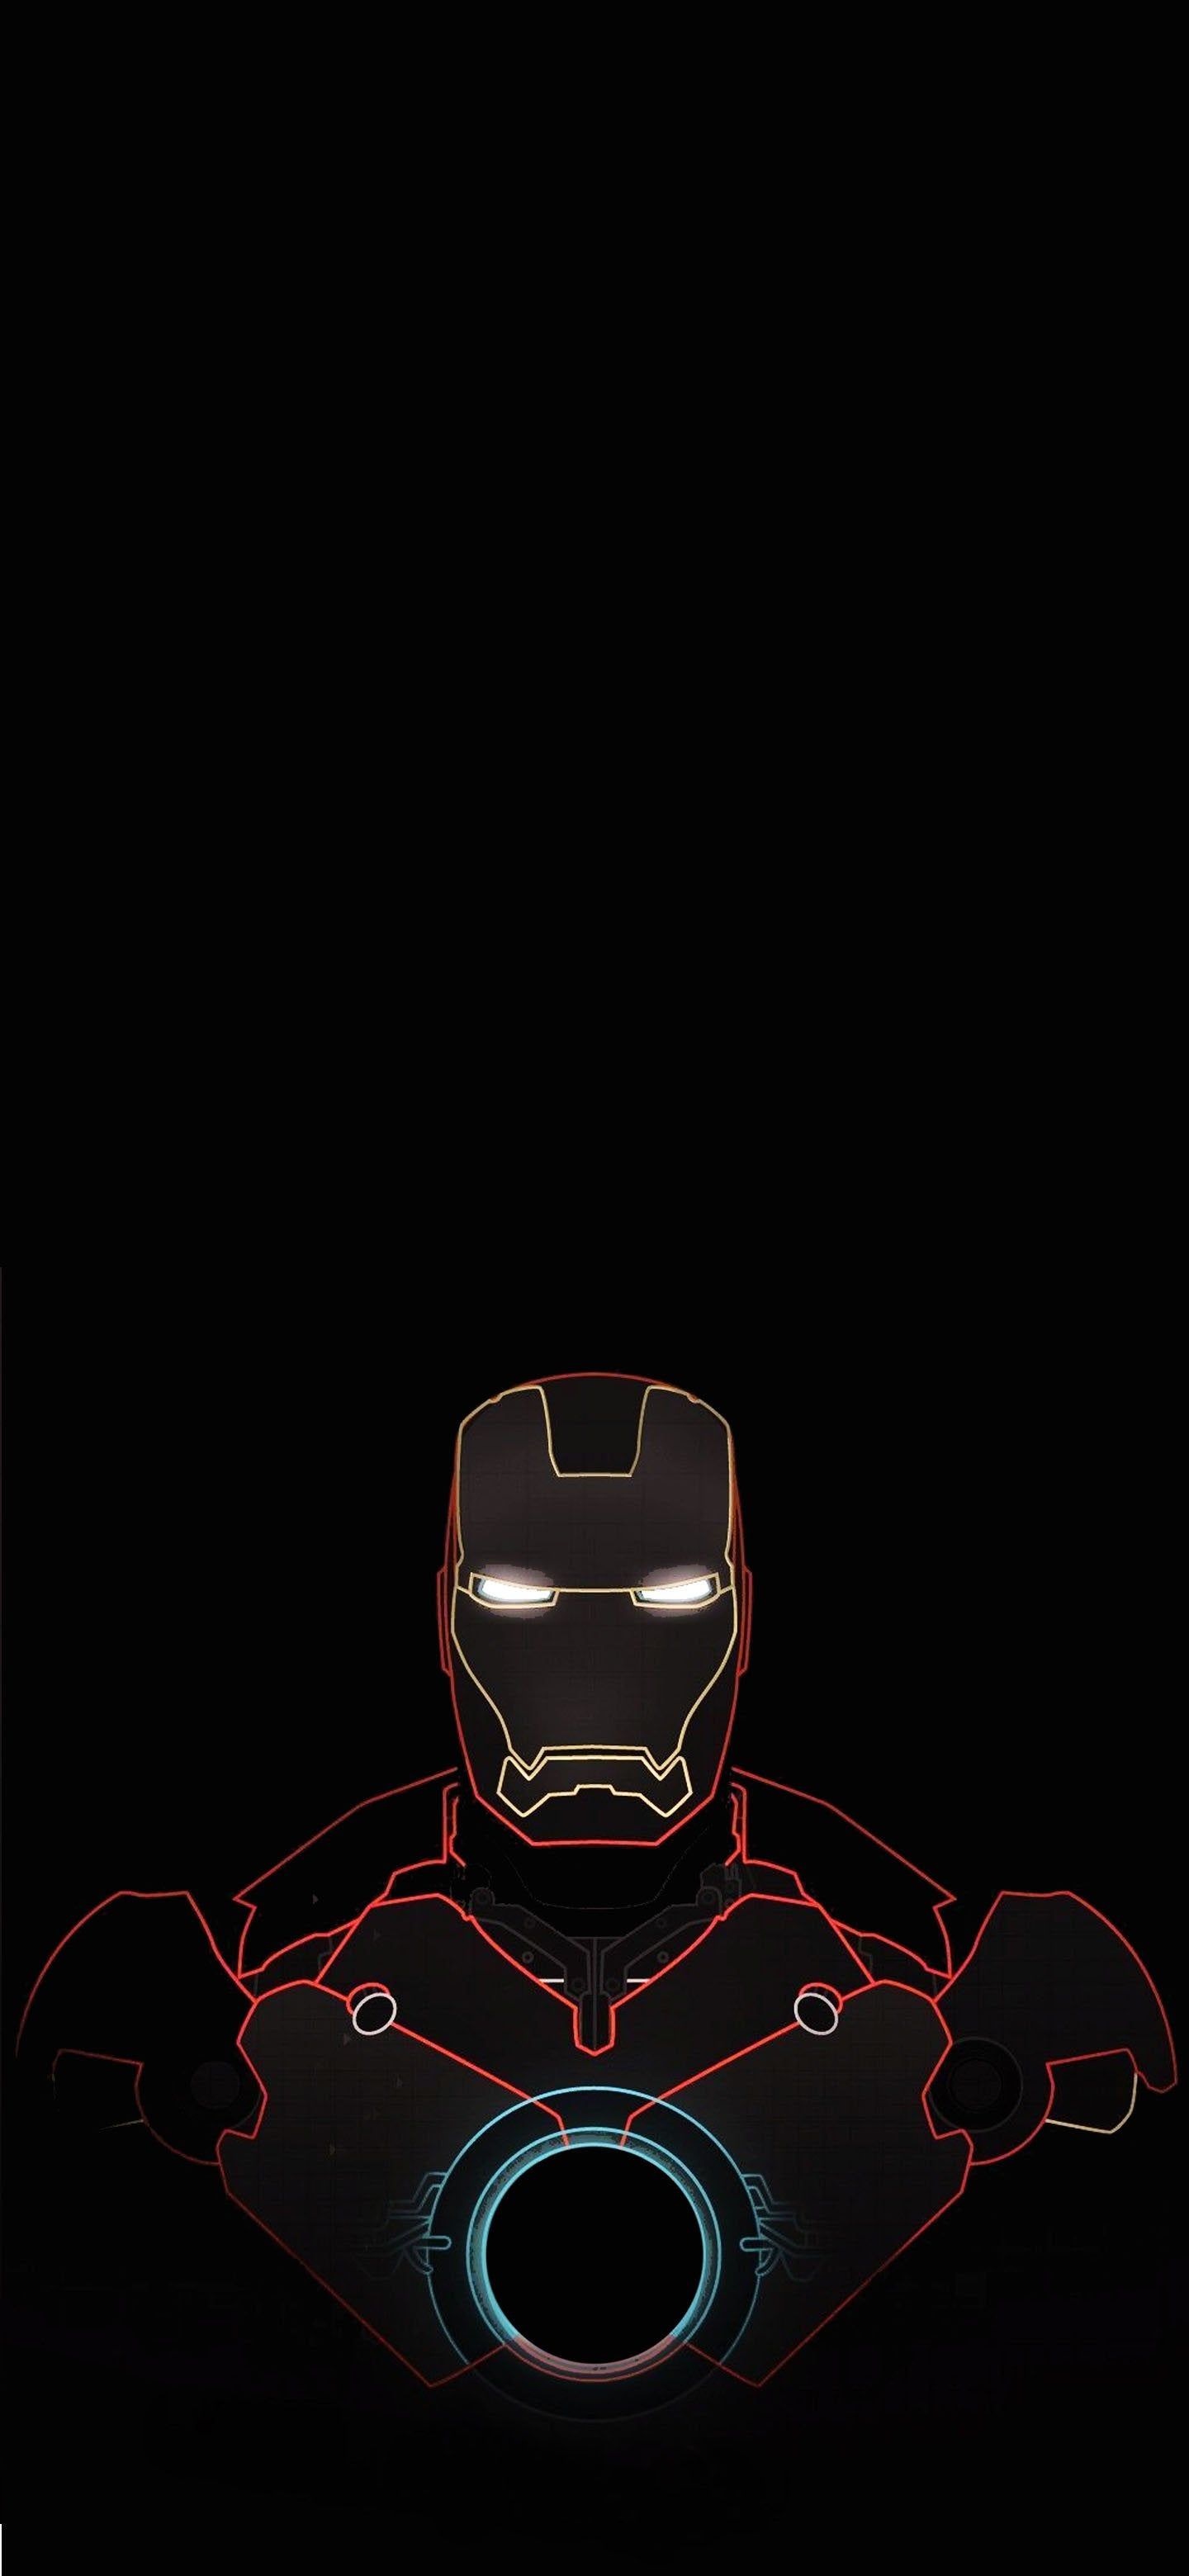 someone please align this iron man wallpaper to my fingerprint